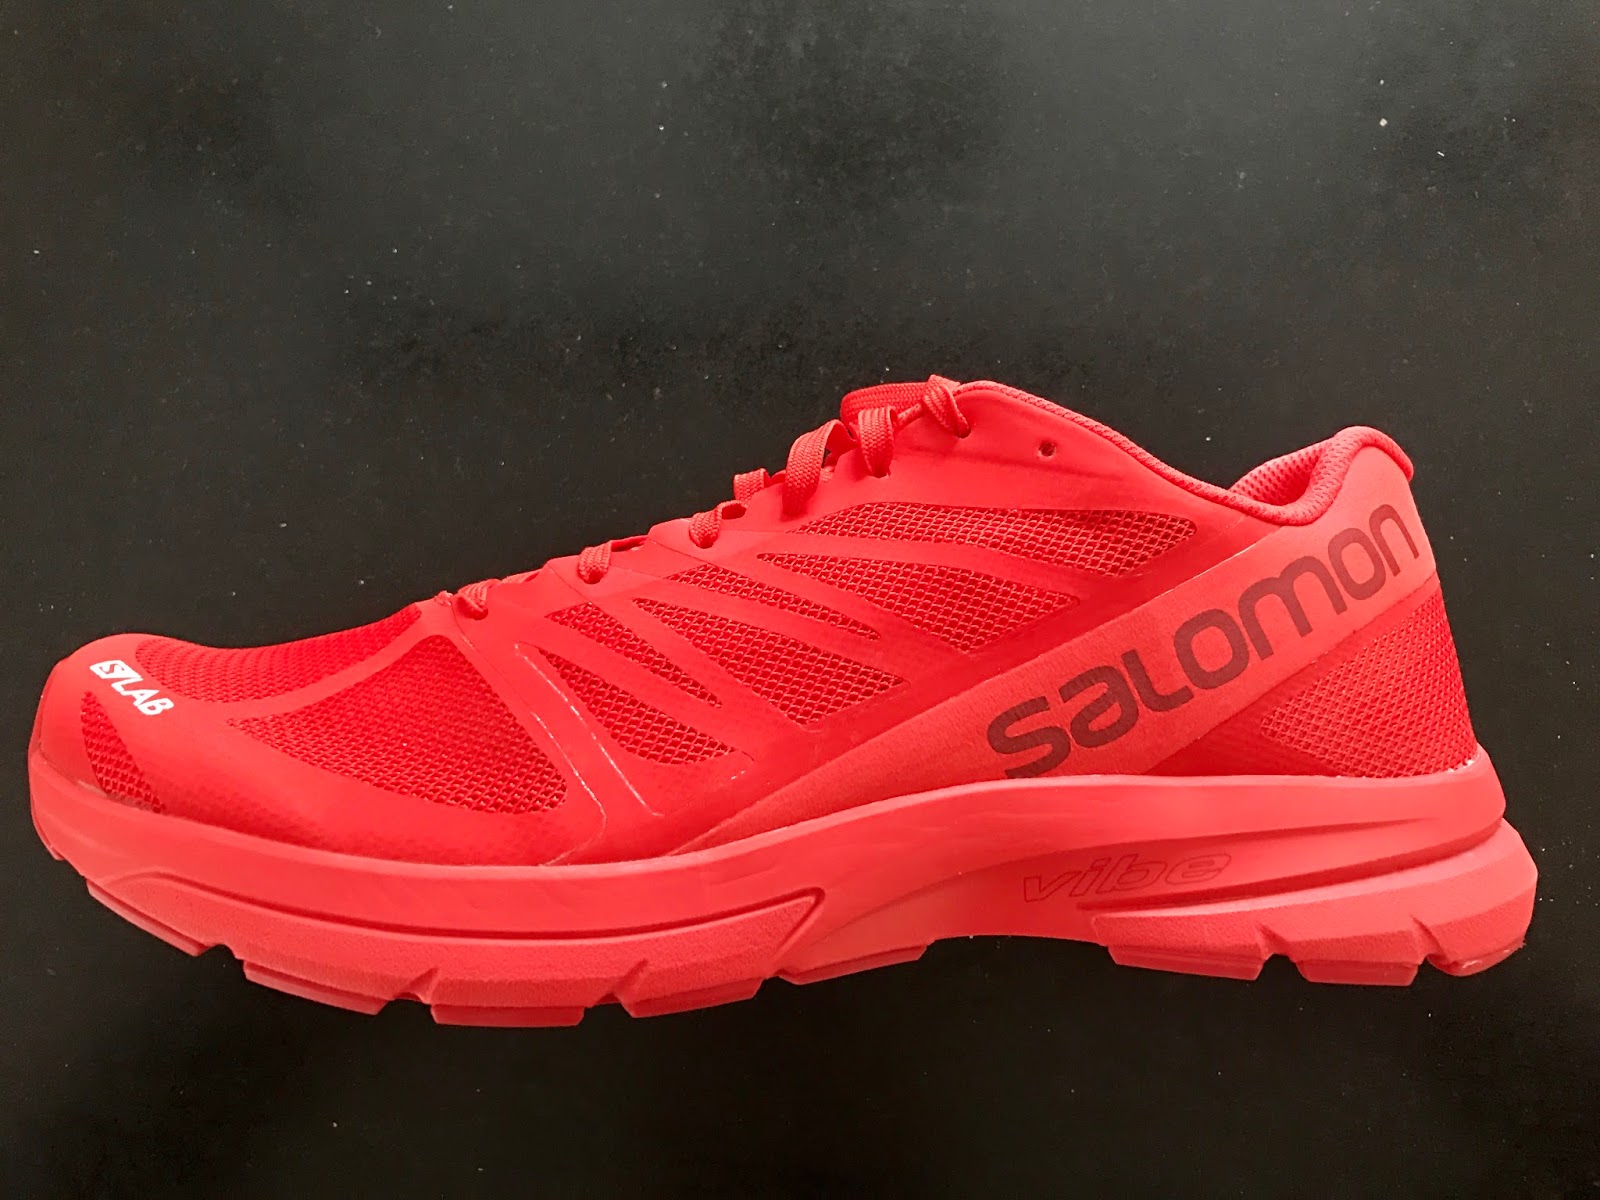 Road Trail Run: Review Salomon S/Lab Responsive Racer with Vibration Attenuation.